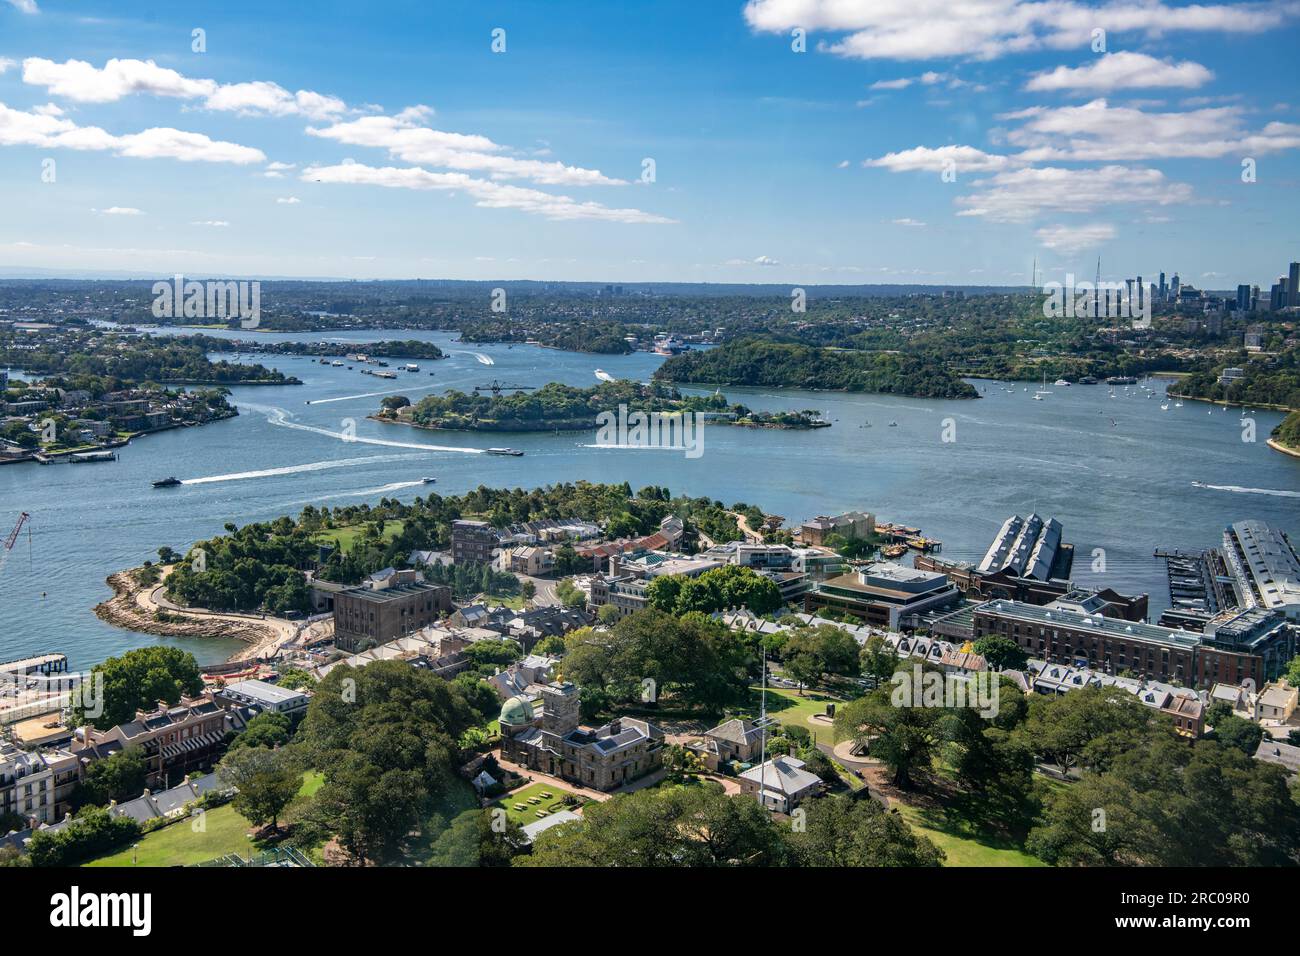 Aerial view Sydney Harbour looking North West with Garden Island and historic Rocks district in foreground Stock Photo